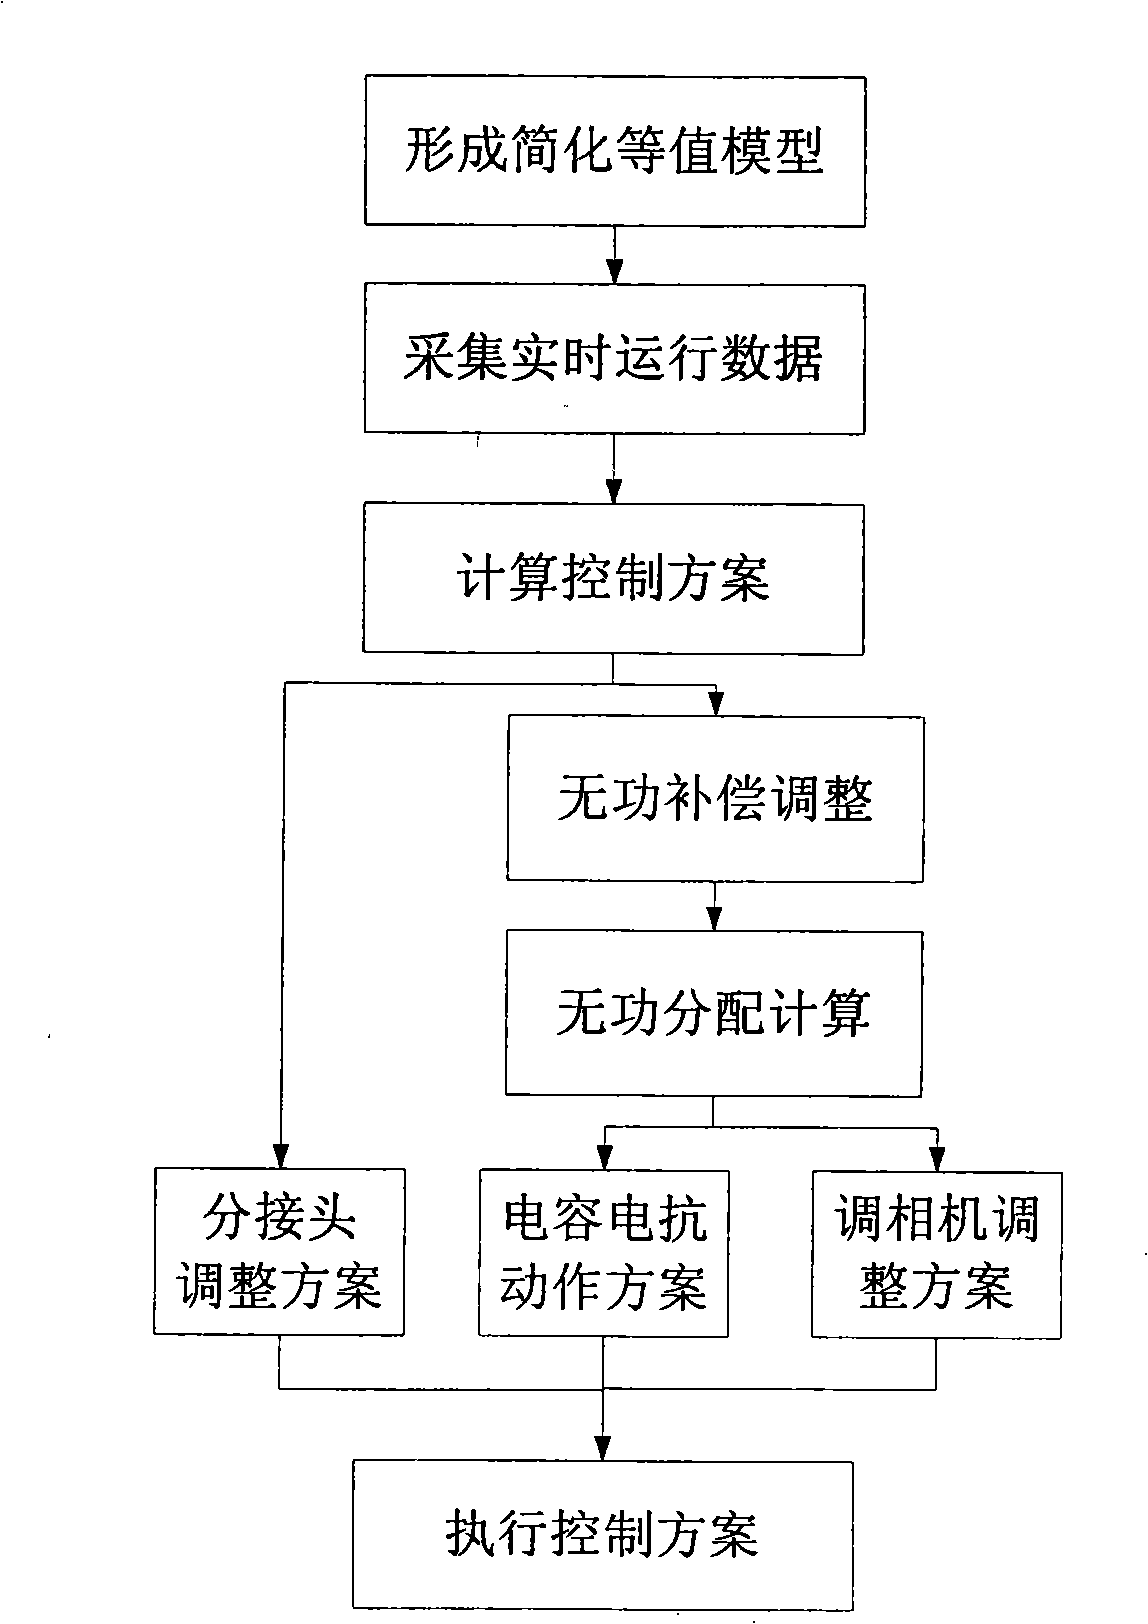 Control method of transformer station voltage for realizing comprehensive coordination of continuous device and discrete device